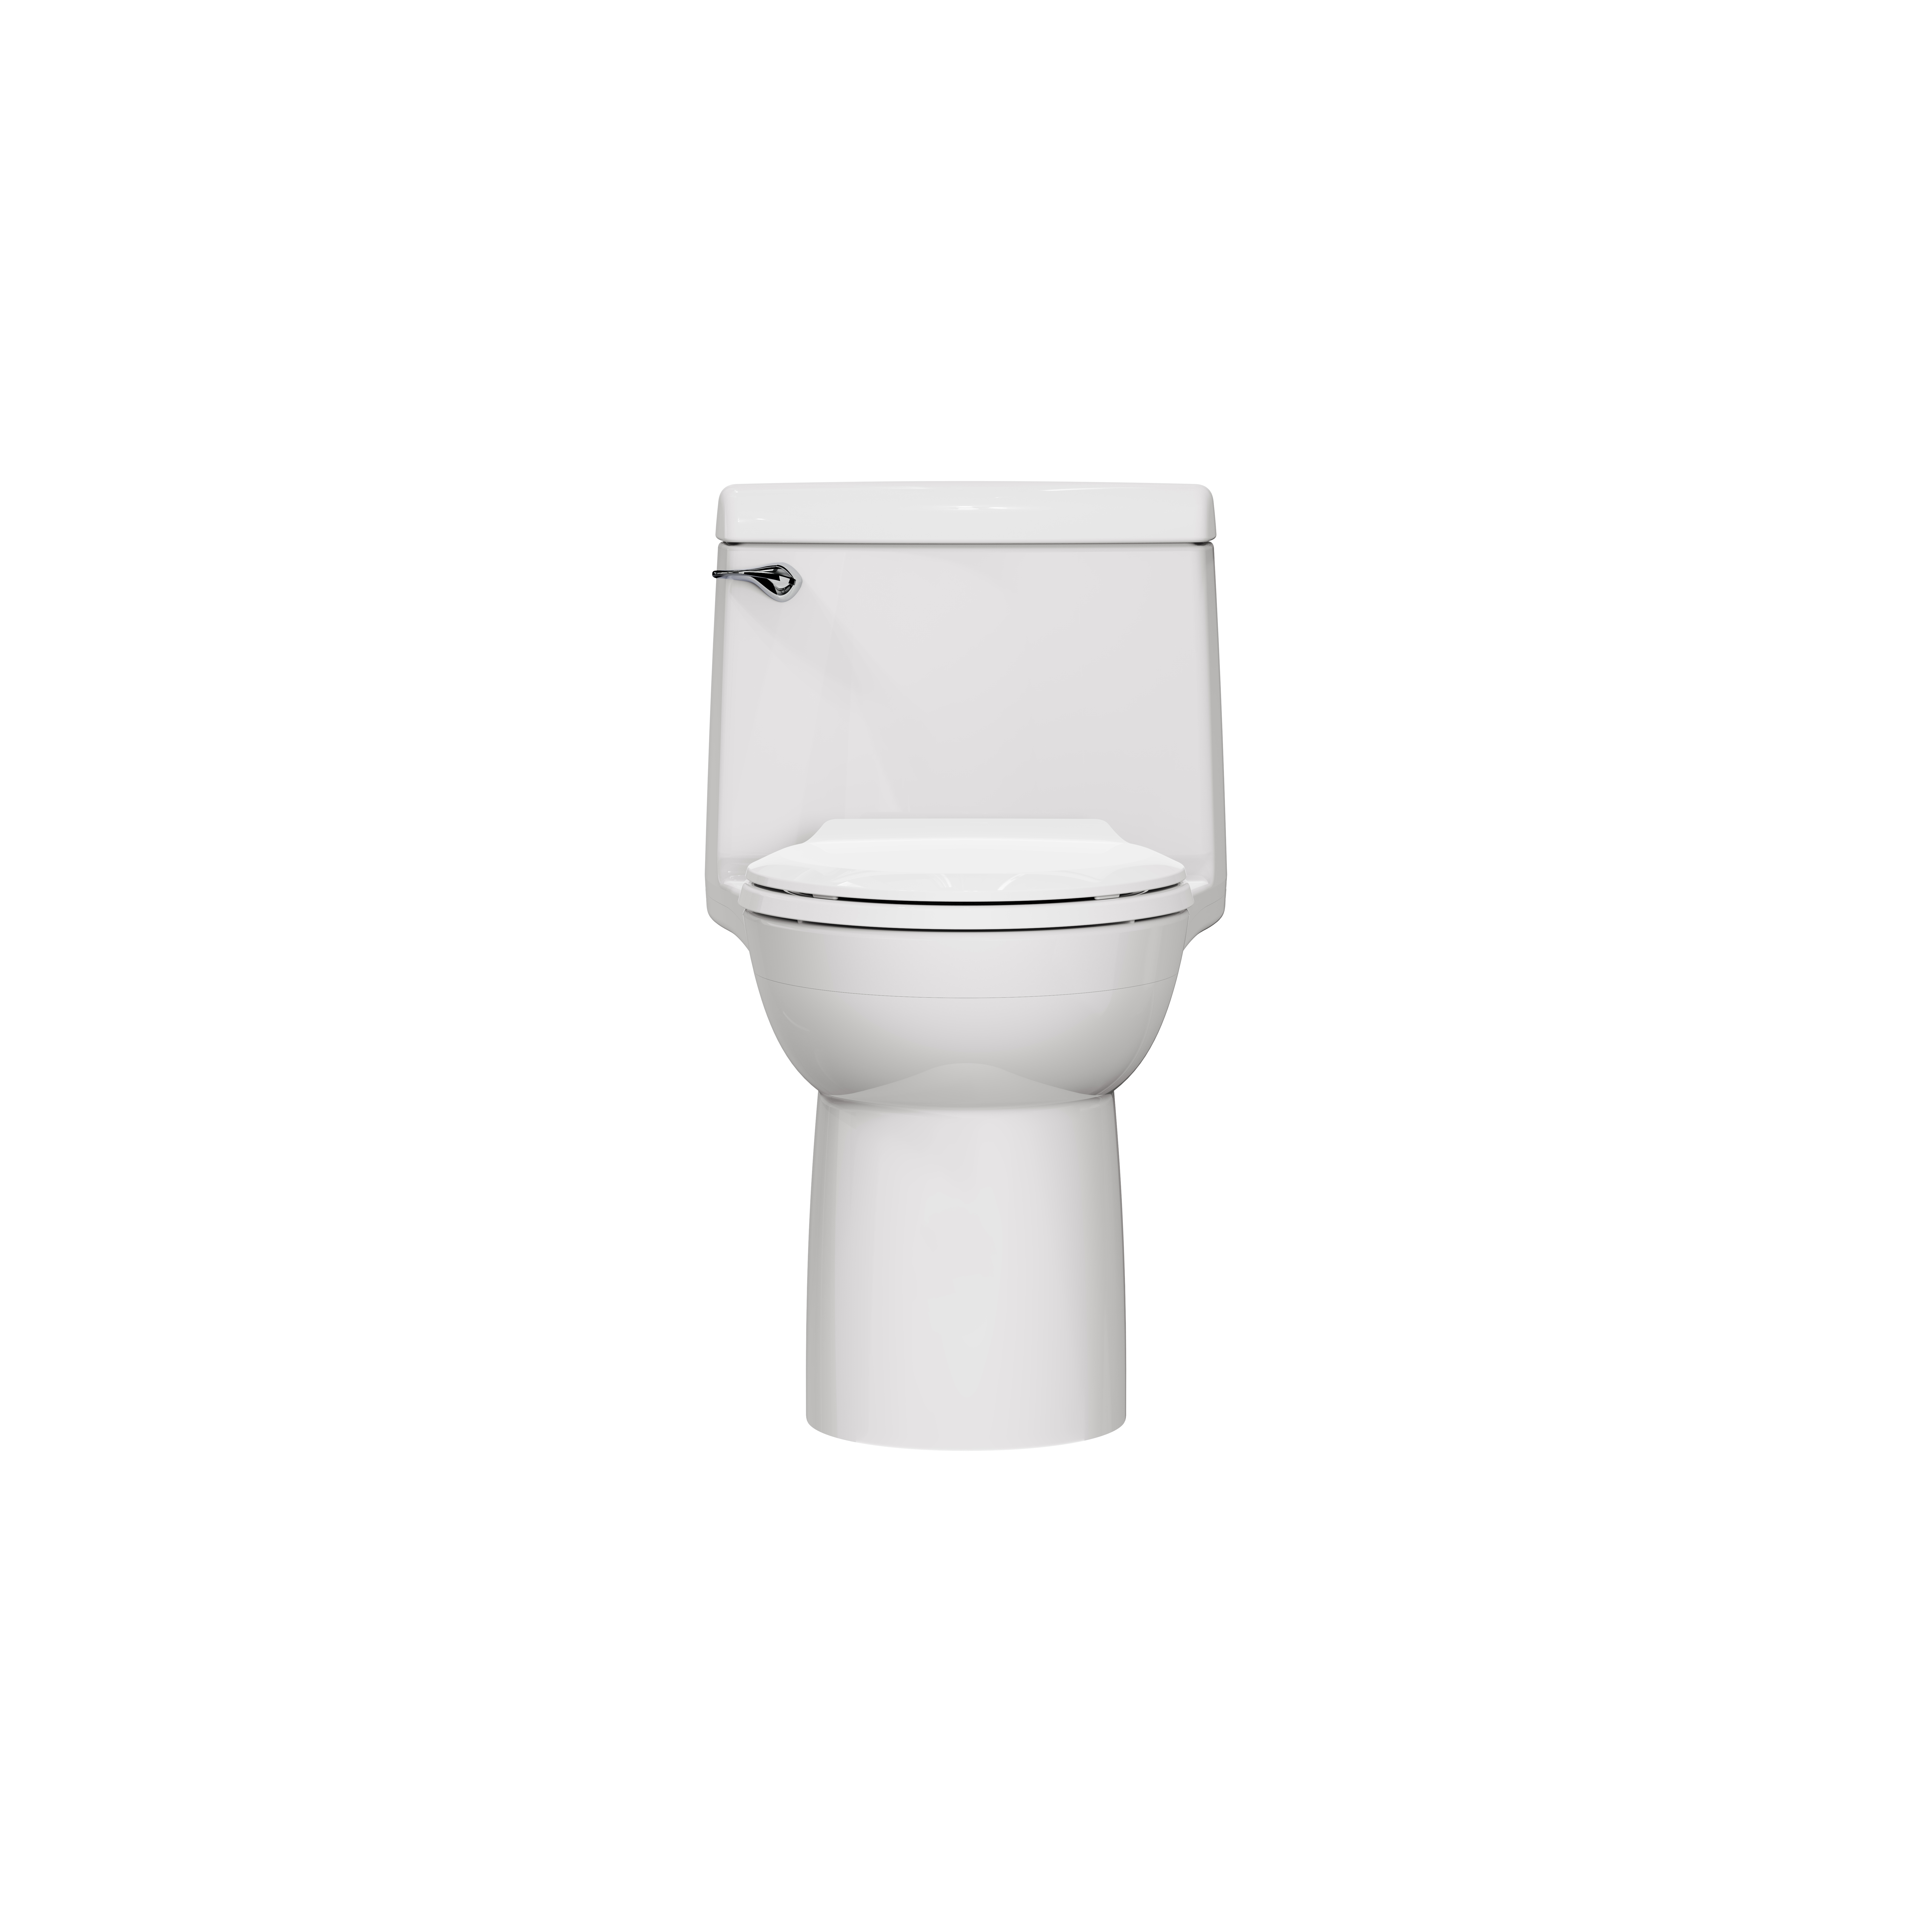 Champion® 4 One-Piece 1.6 gpf/6.0 Lpf Chair Height Elongated Toilet With Seat